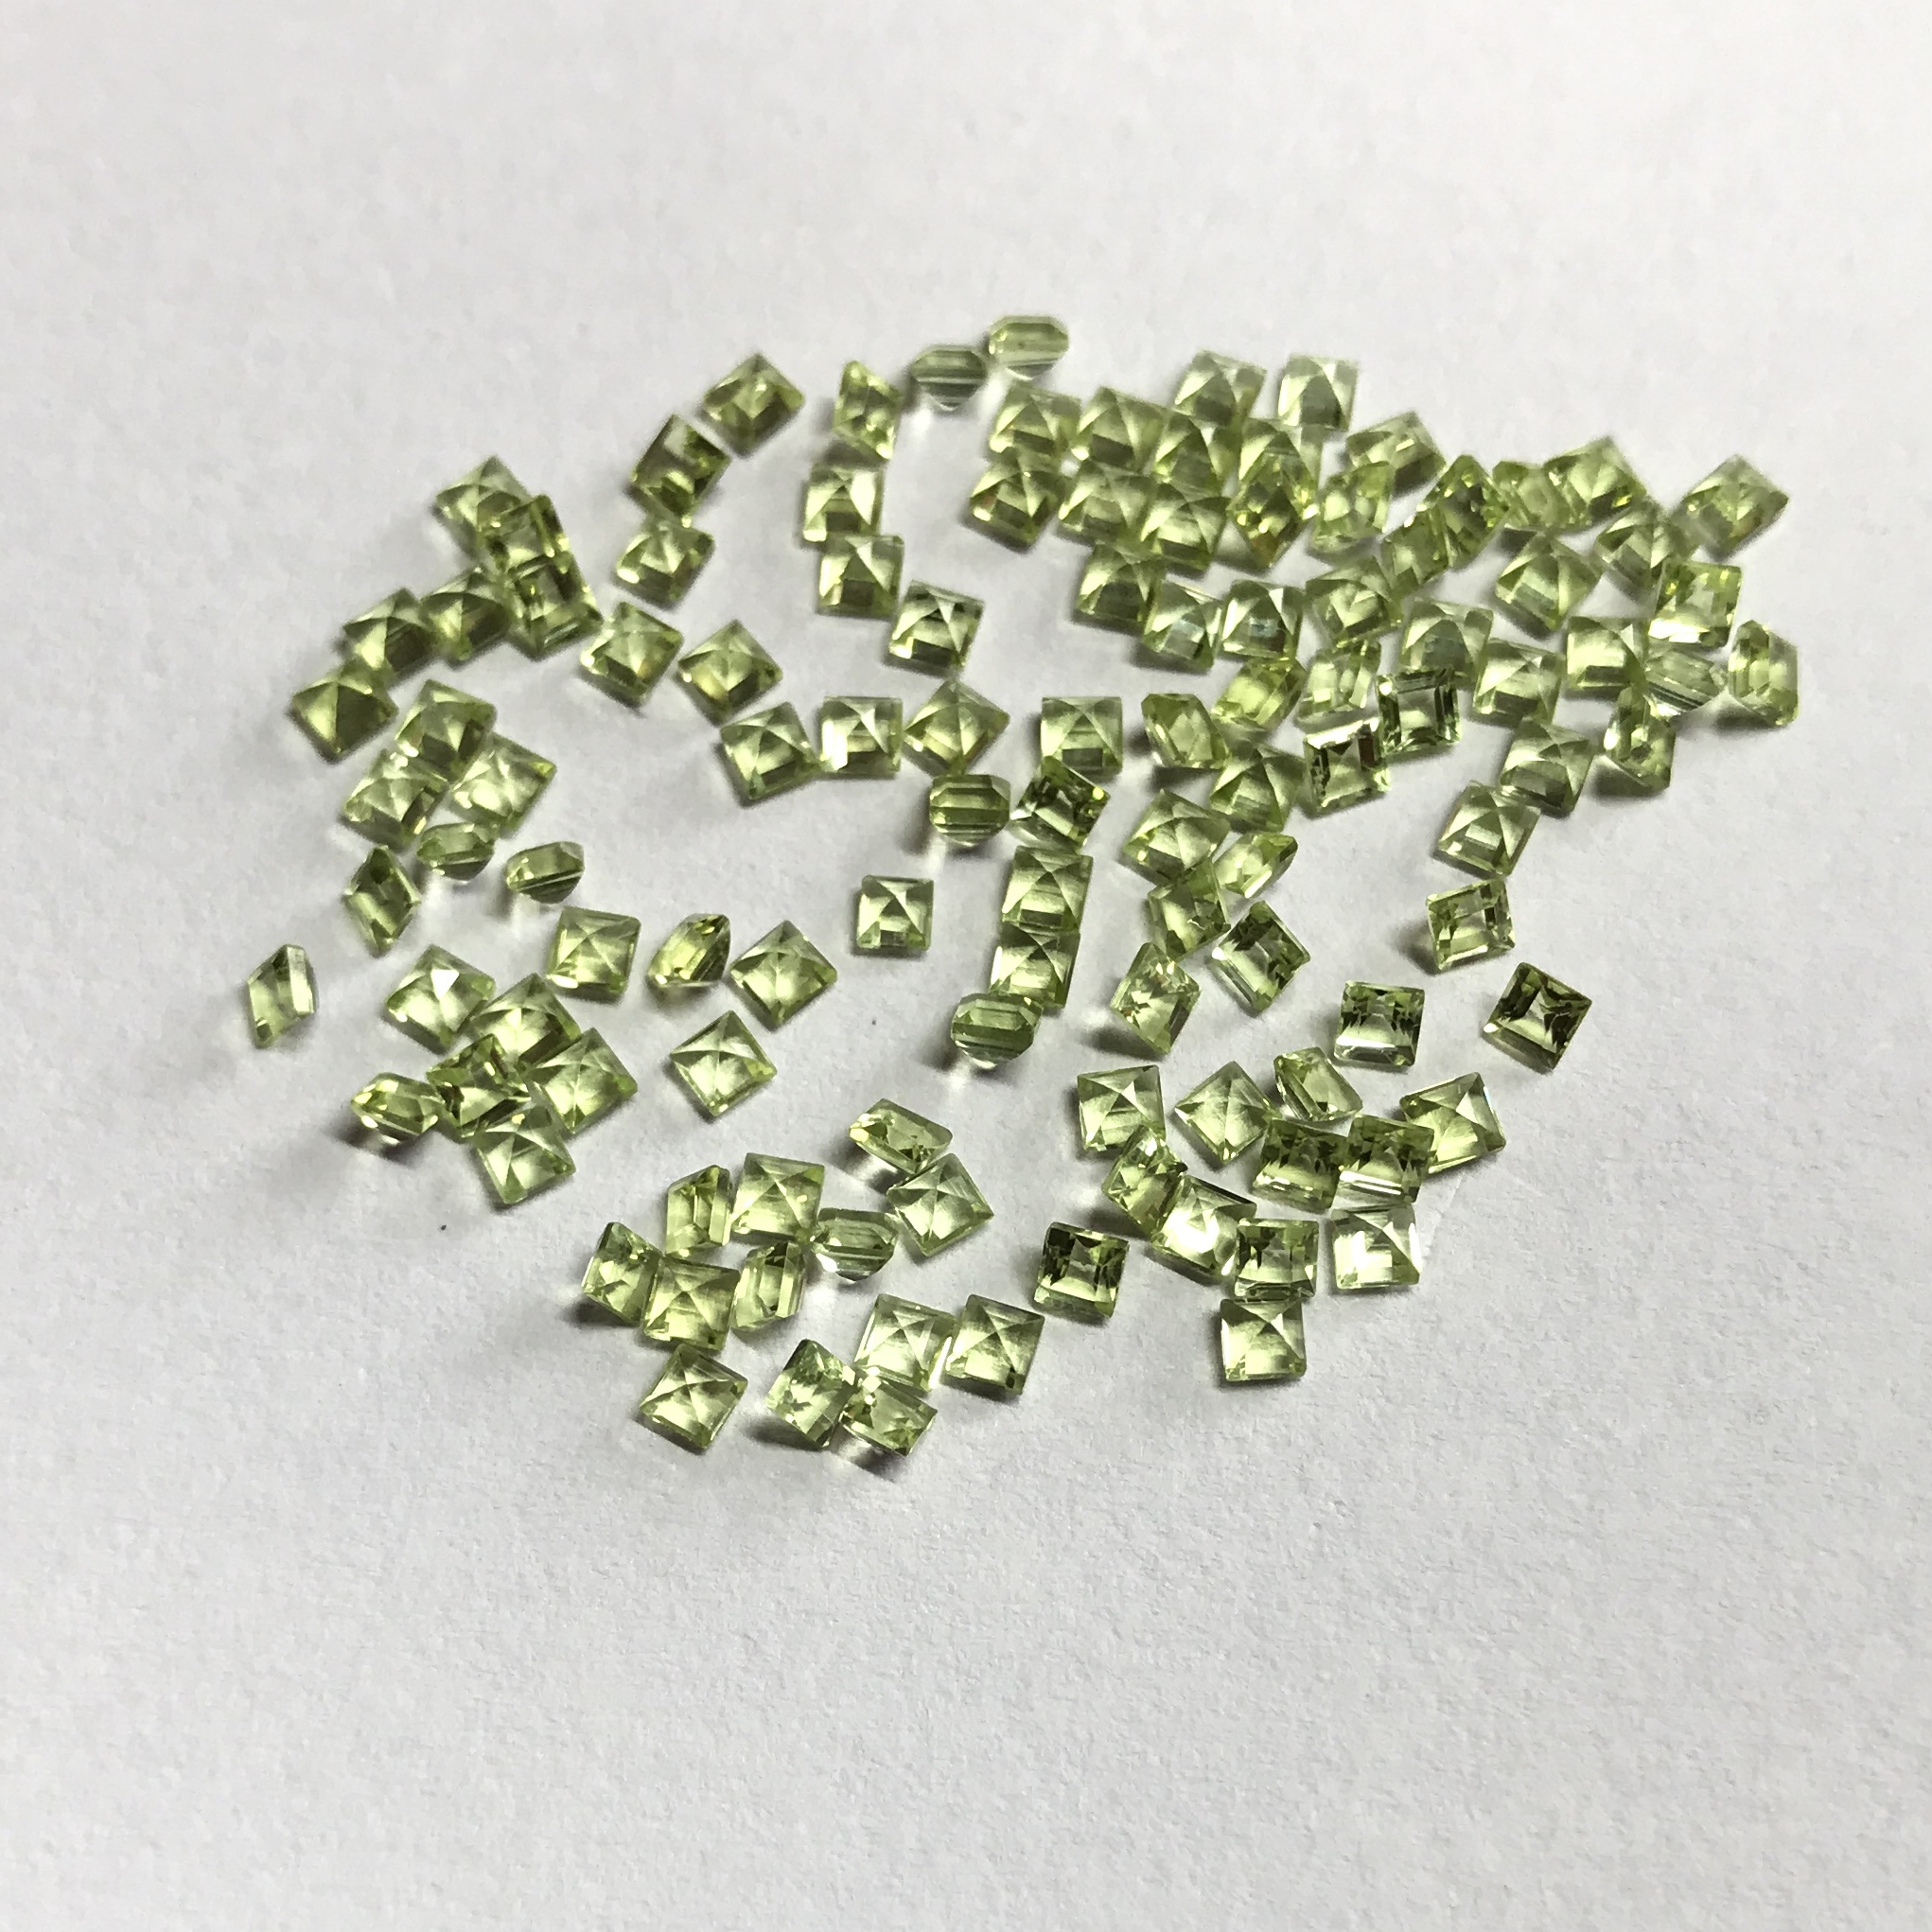 2mm Natural Peridot Square Faceted Gemstone